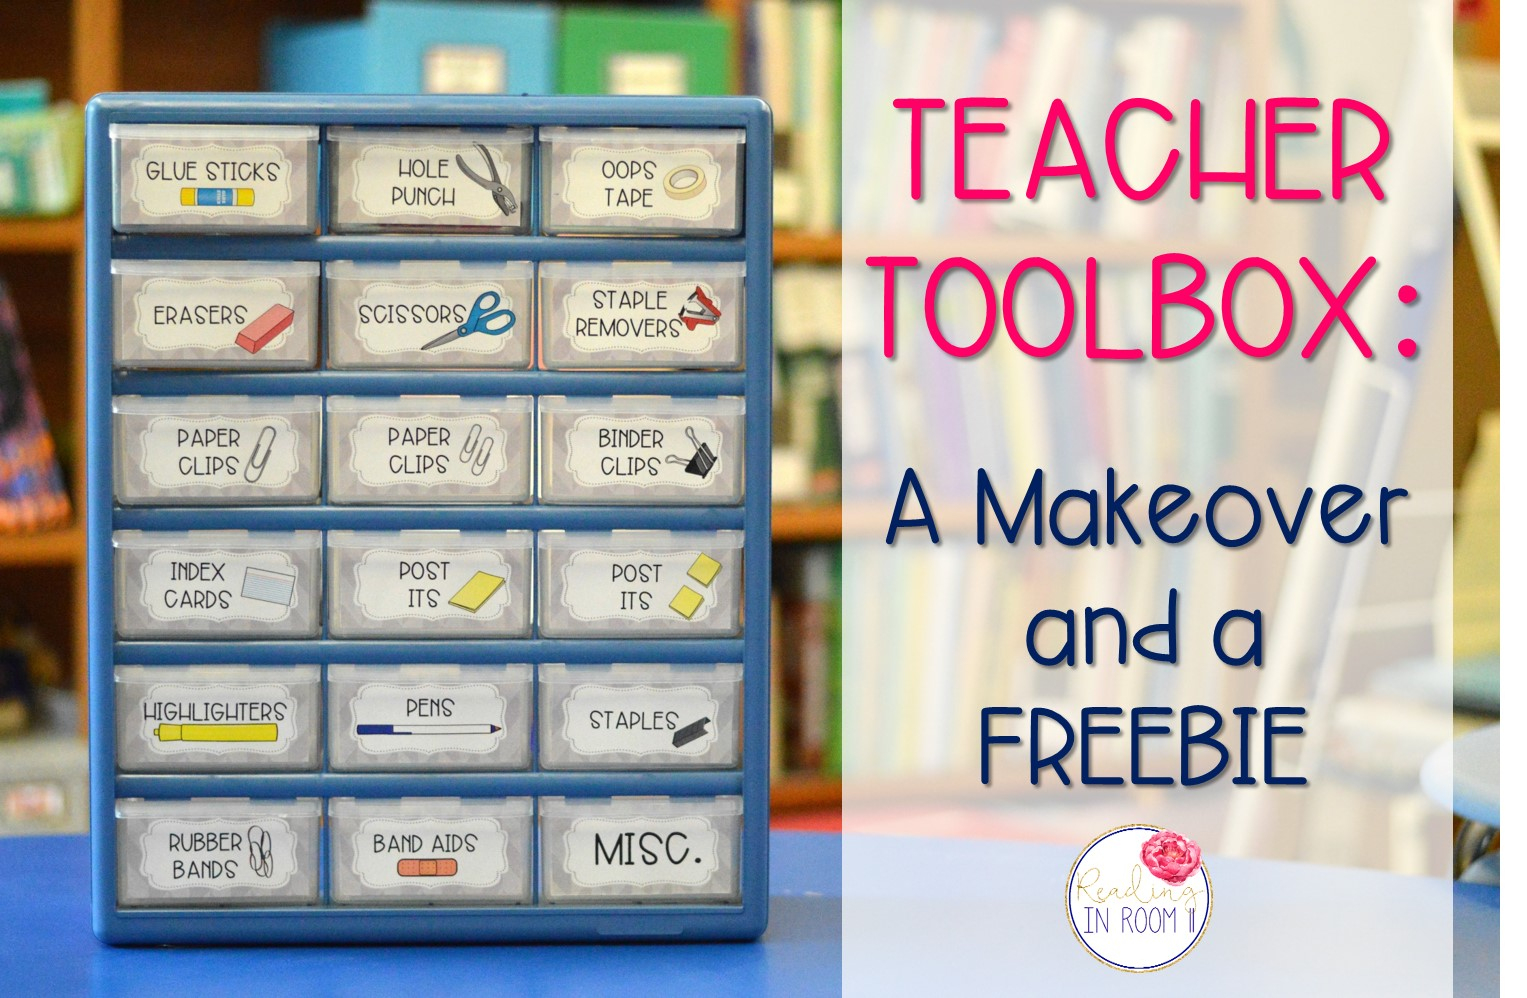 Printable Labels For Teacher Toolbox | Download Them Or Print - Free Printable Teacher Toolbox Labels